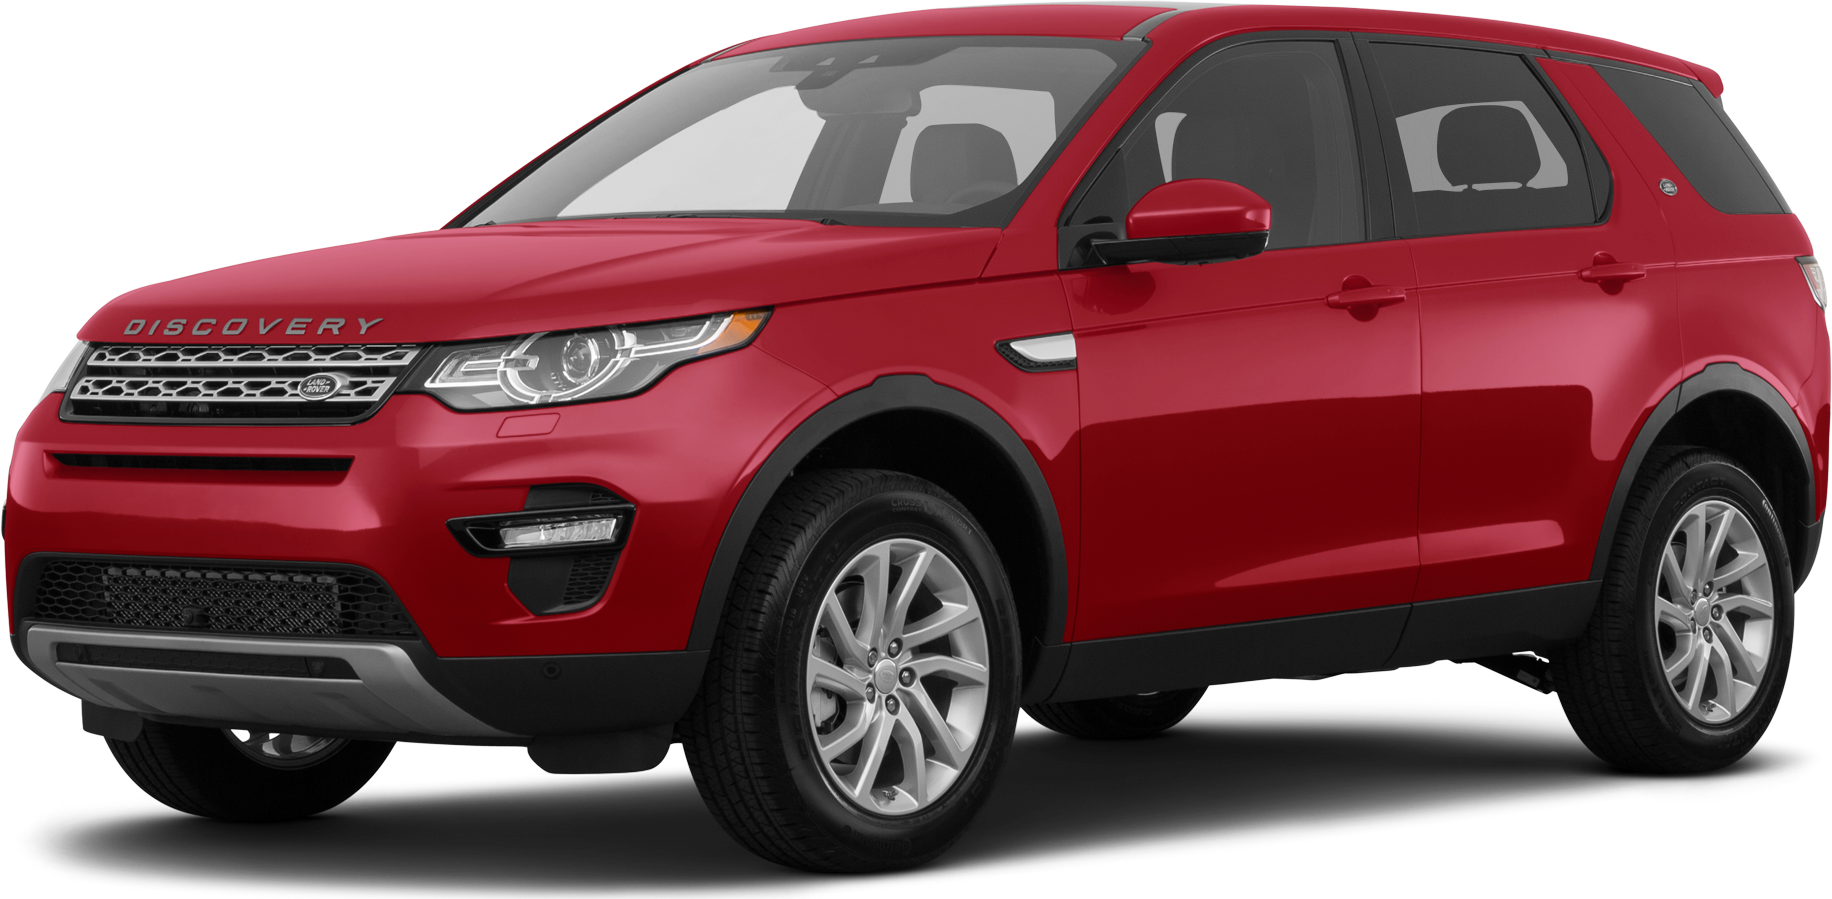 SUV Review: 2018 Land Rover Discovery Sport